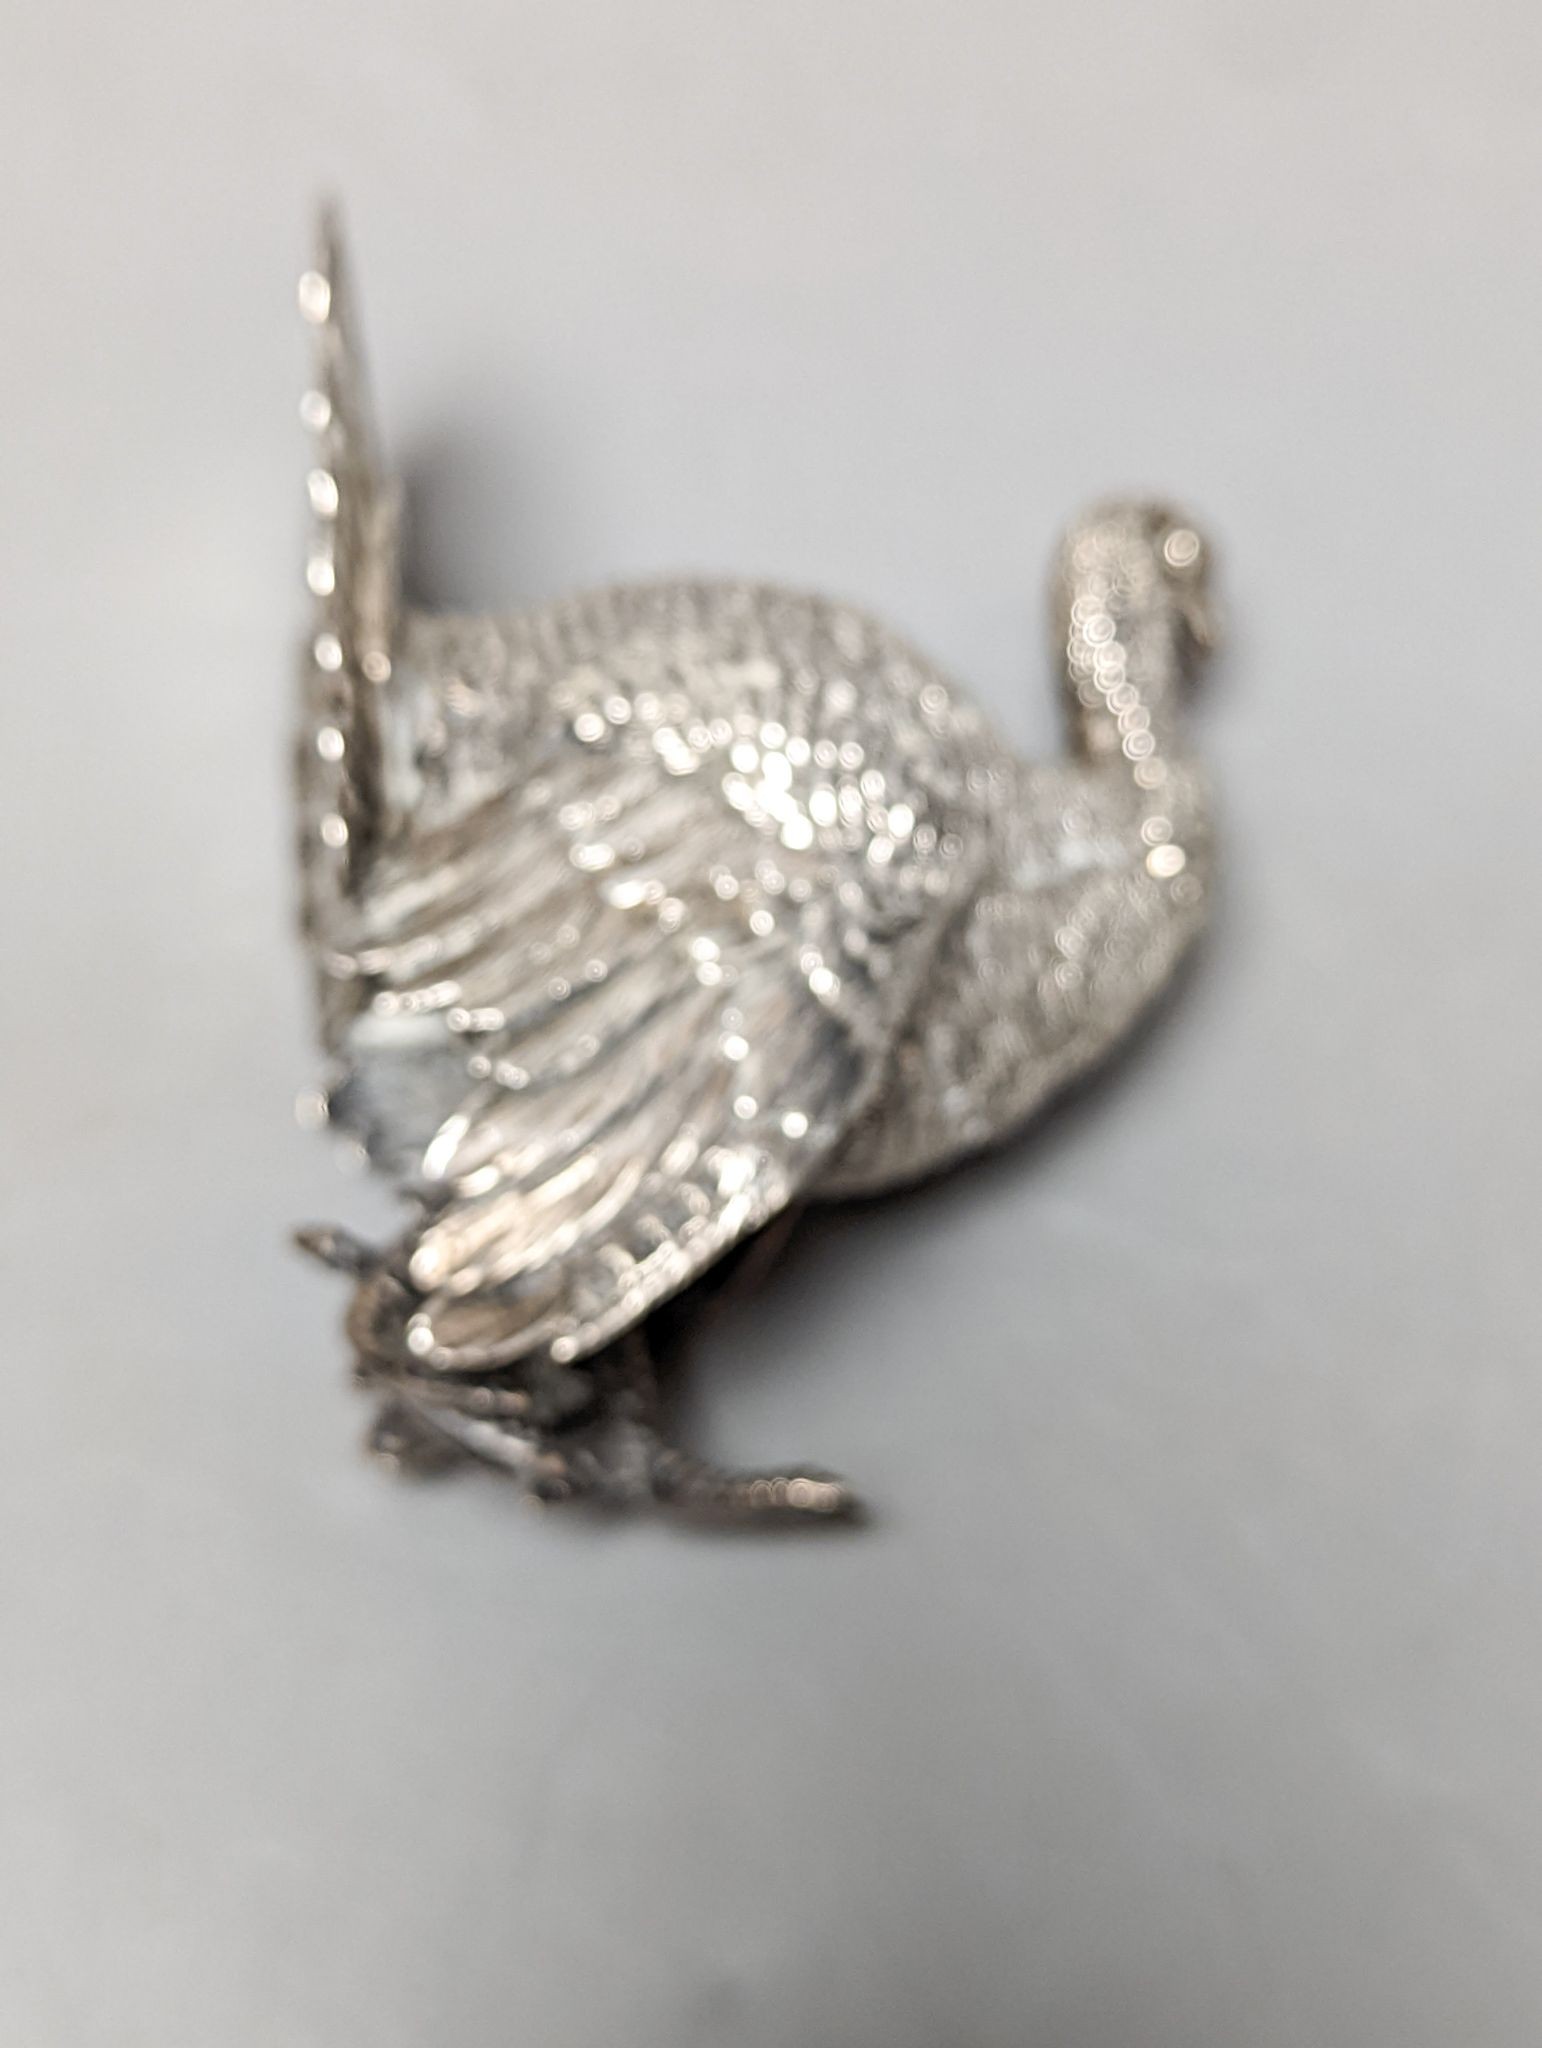 A late 19th /early 20th century Hanau silver free standing model of a game bird, 1930's import marks, height 10.4cm, 180 grams.